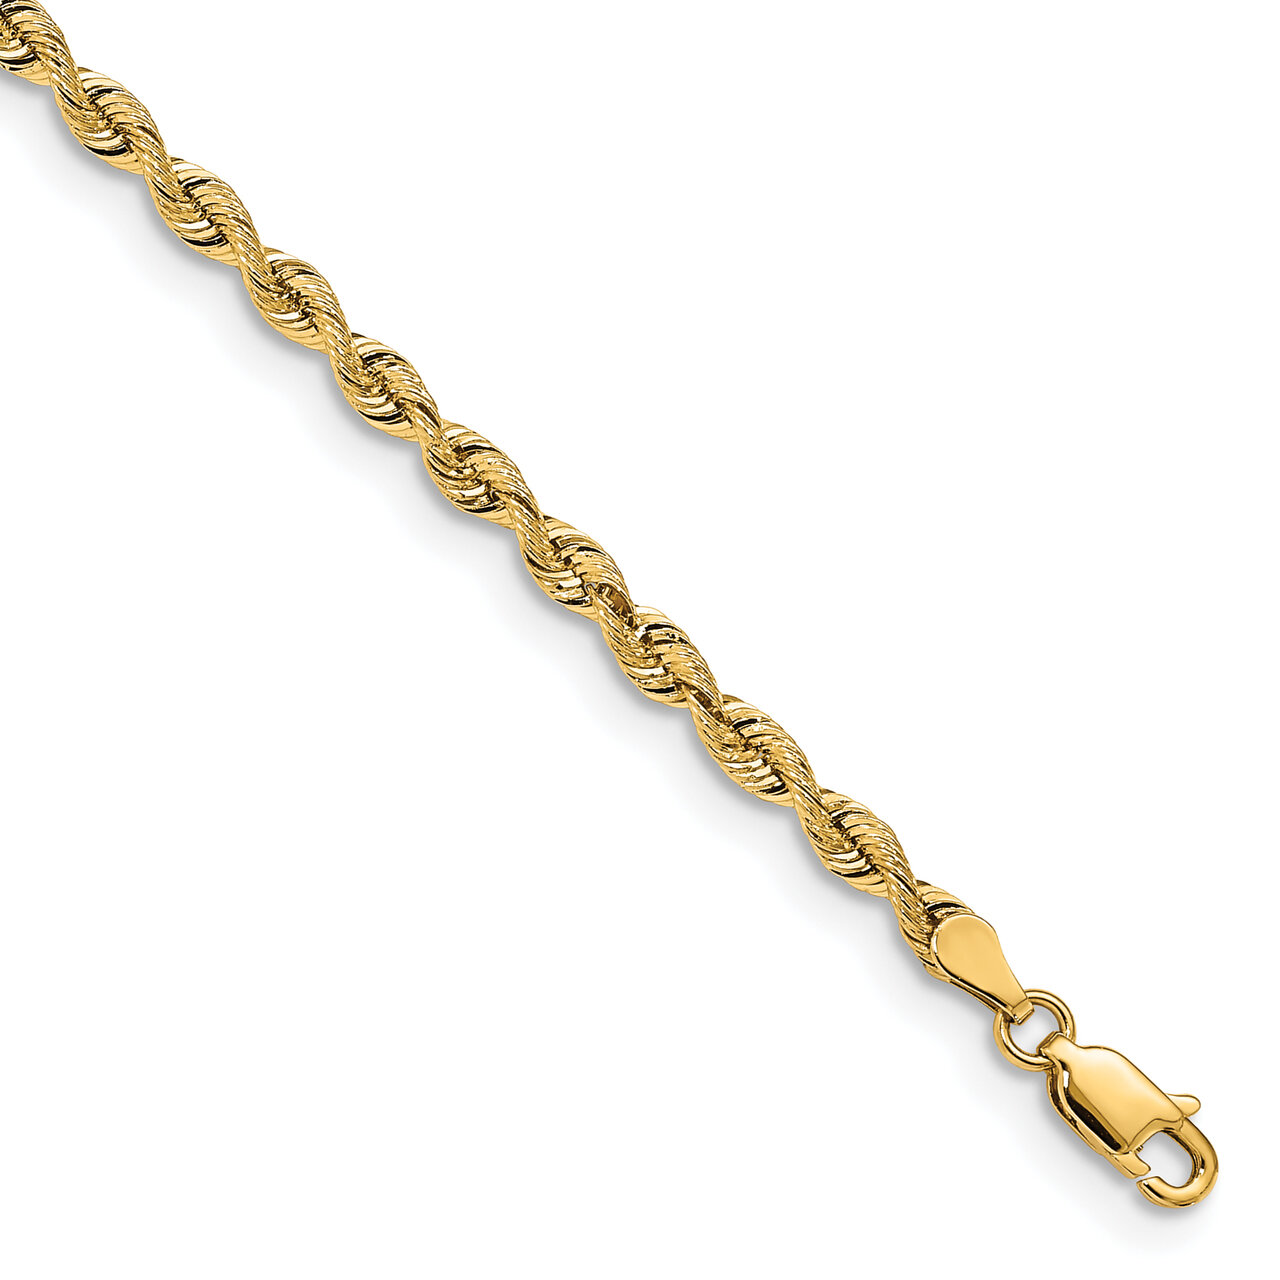 7 Inch 3.25mm Silky Rope Chain 14k Yellow Gold SKR025-7